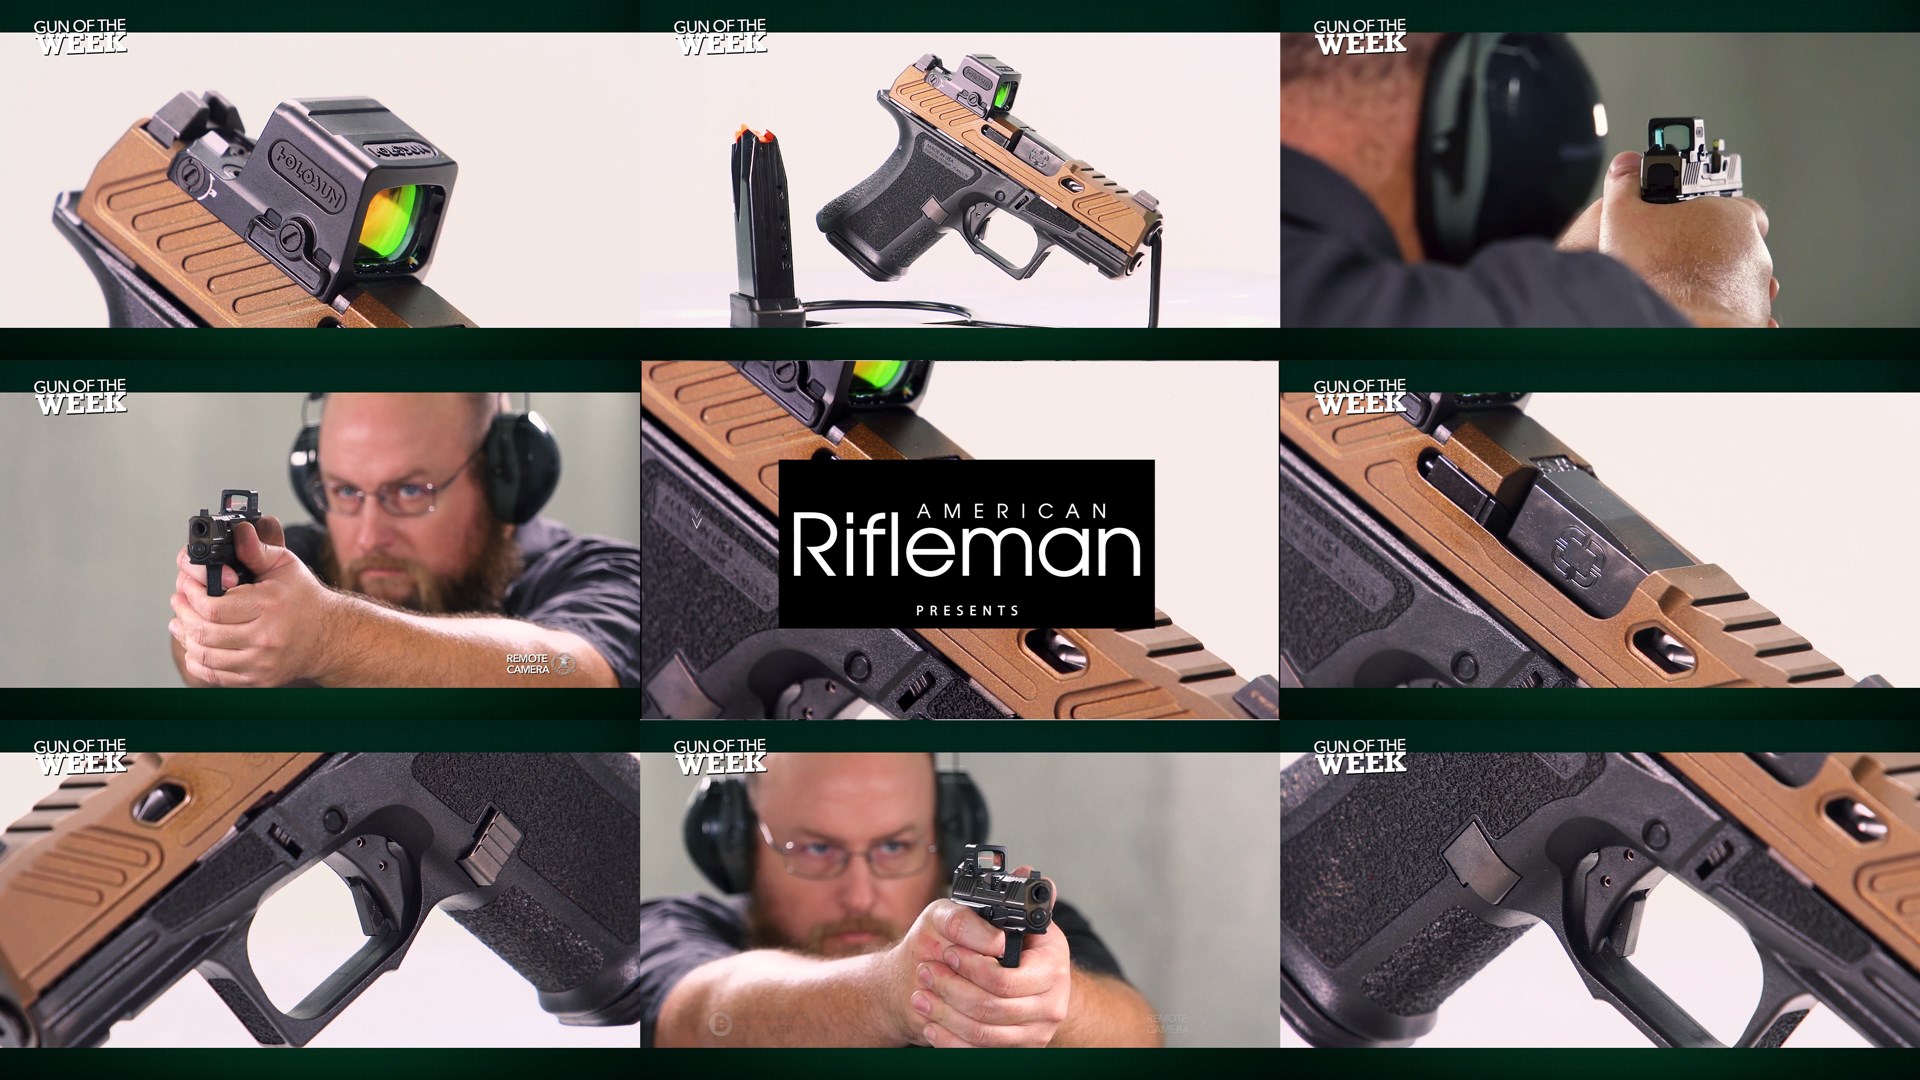 Nine images tiles mosaic AMERICAN RIFLEMAN PRESENTS text middle guns man shooting pistol shadow systems cr920 elite pistol 9 mm shown with holosun red-dot optic